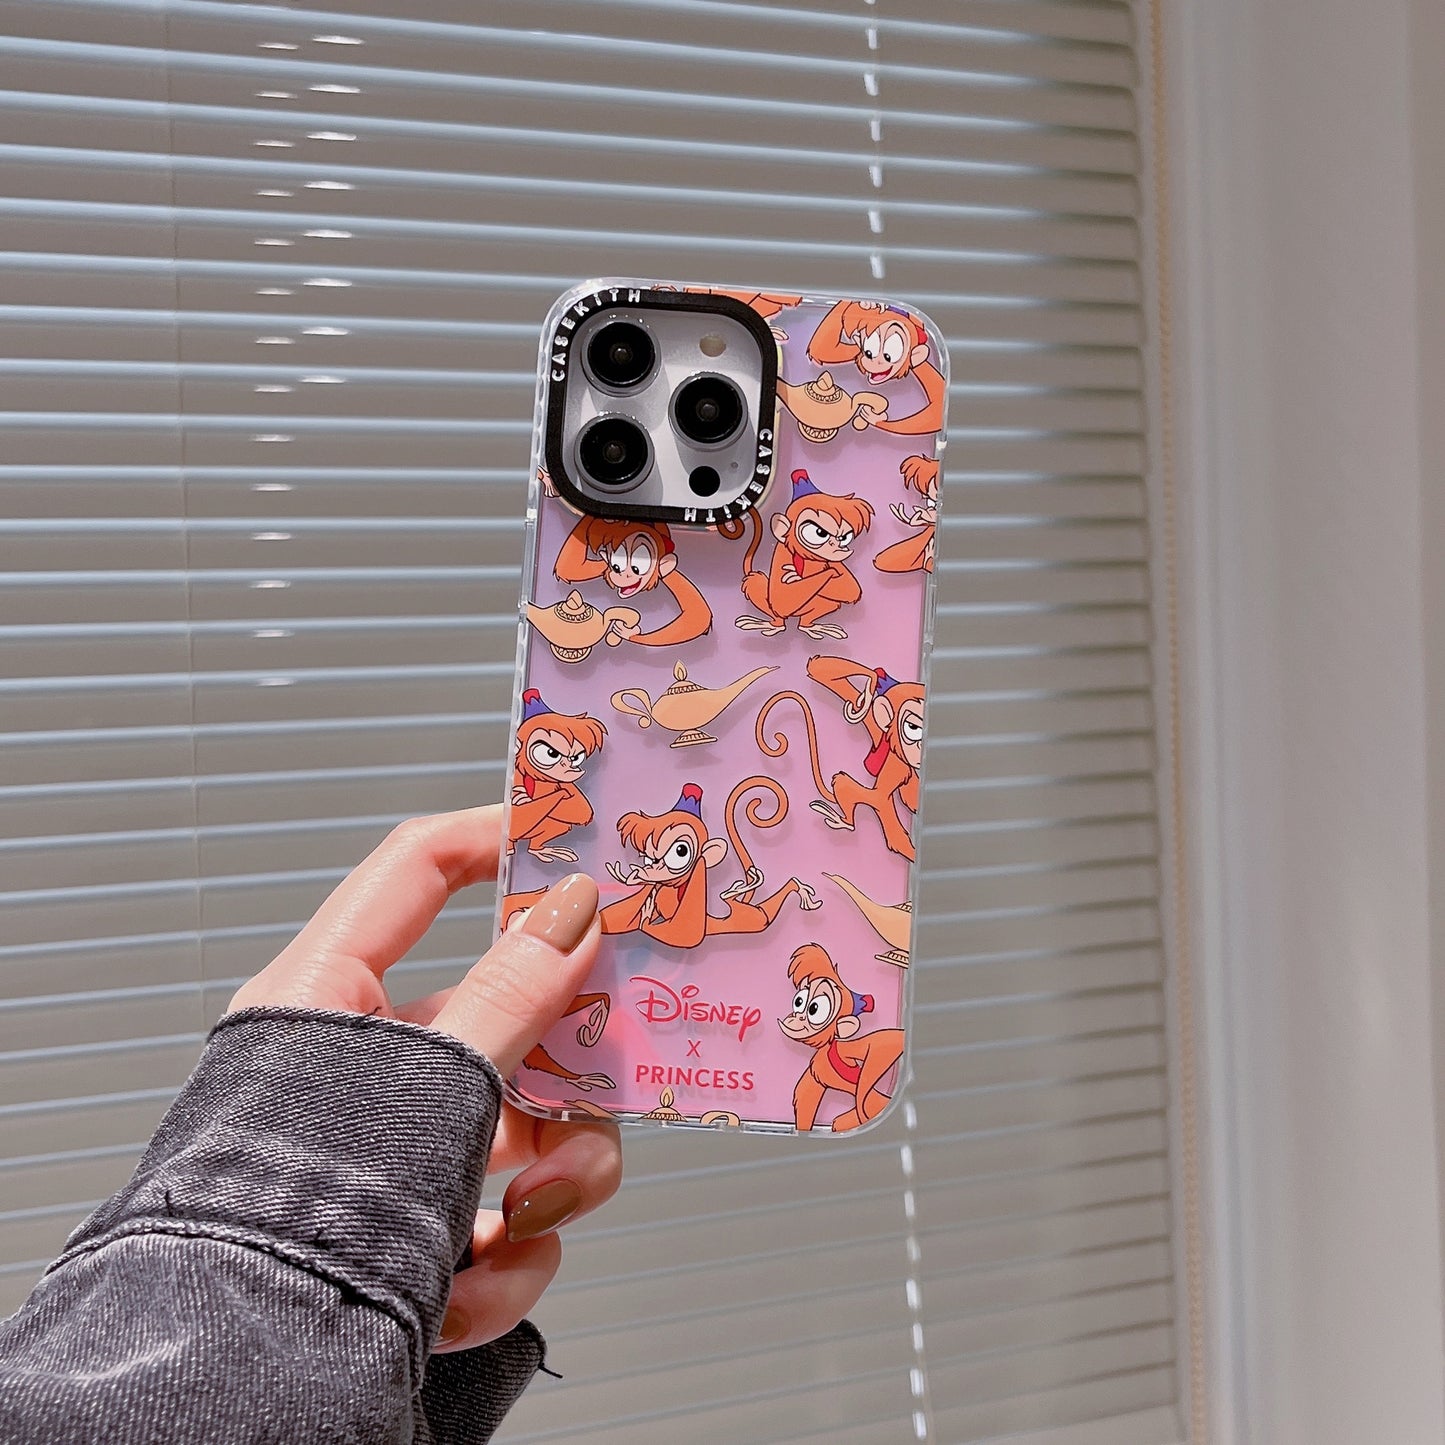 Enchant Your Device with Disney Princess Magic - Discover Magical Phone Cases